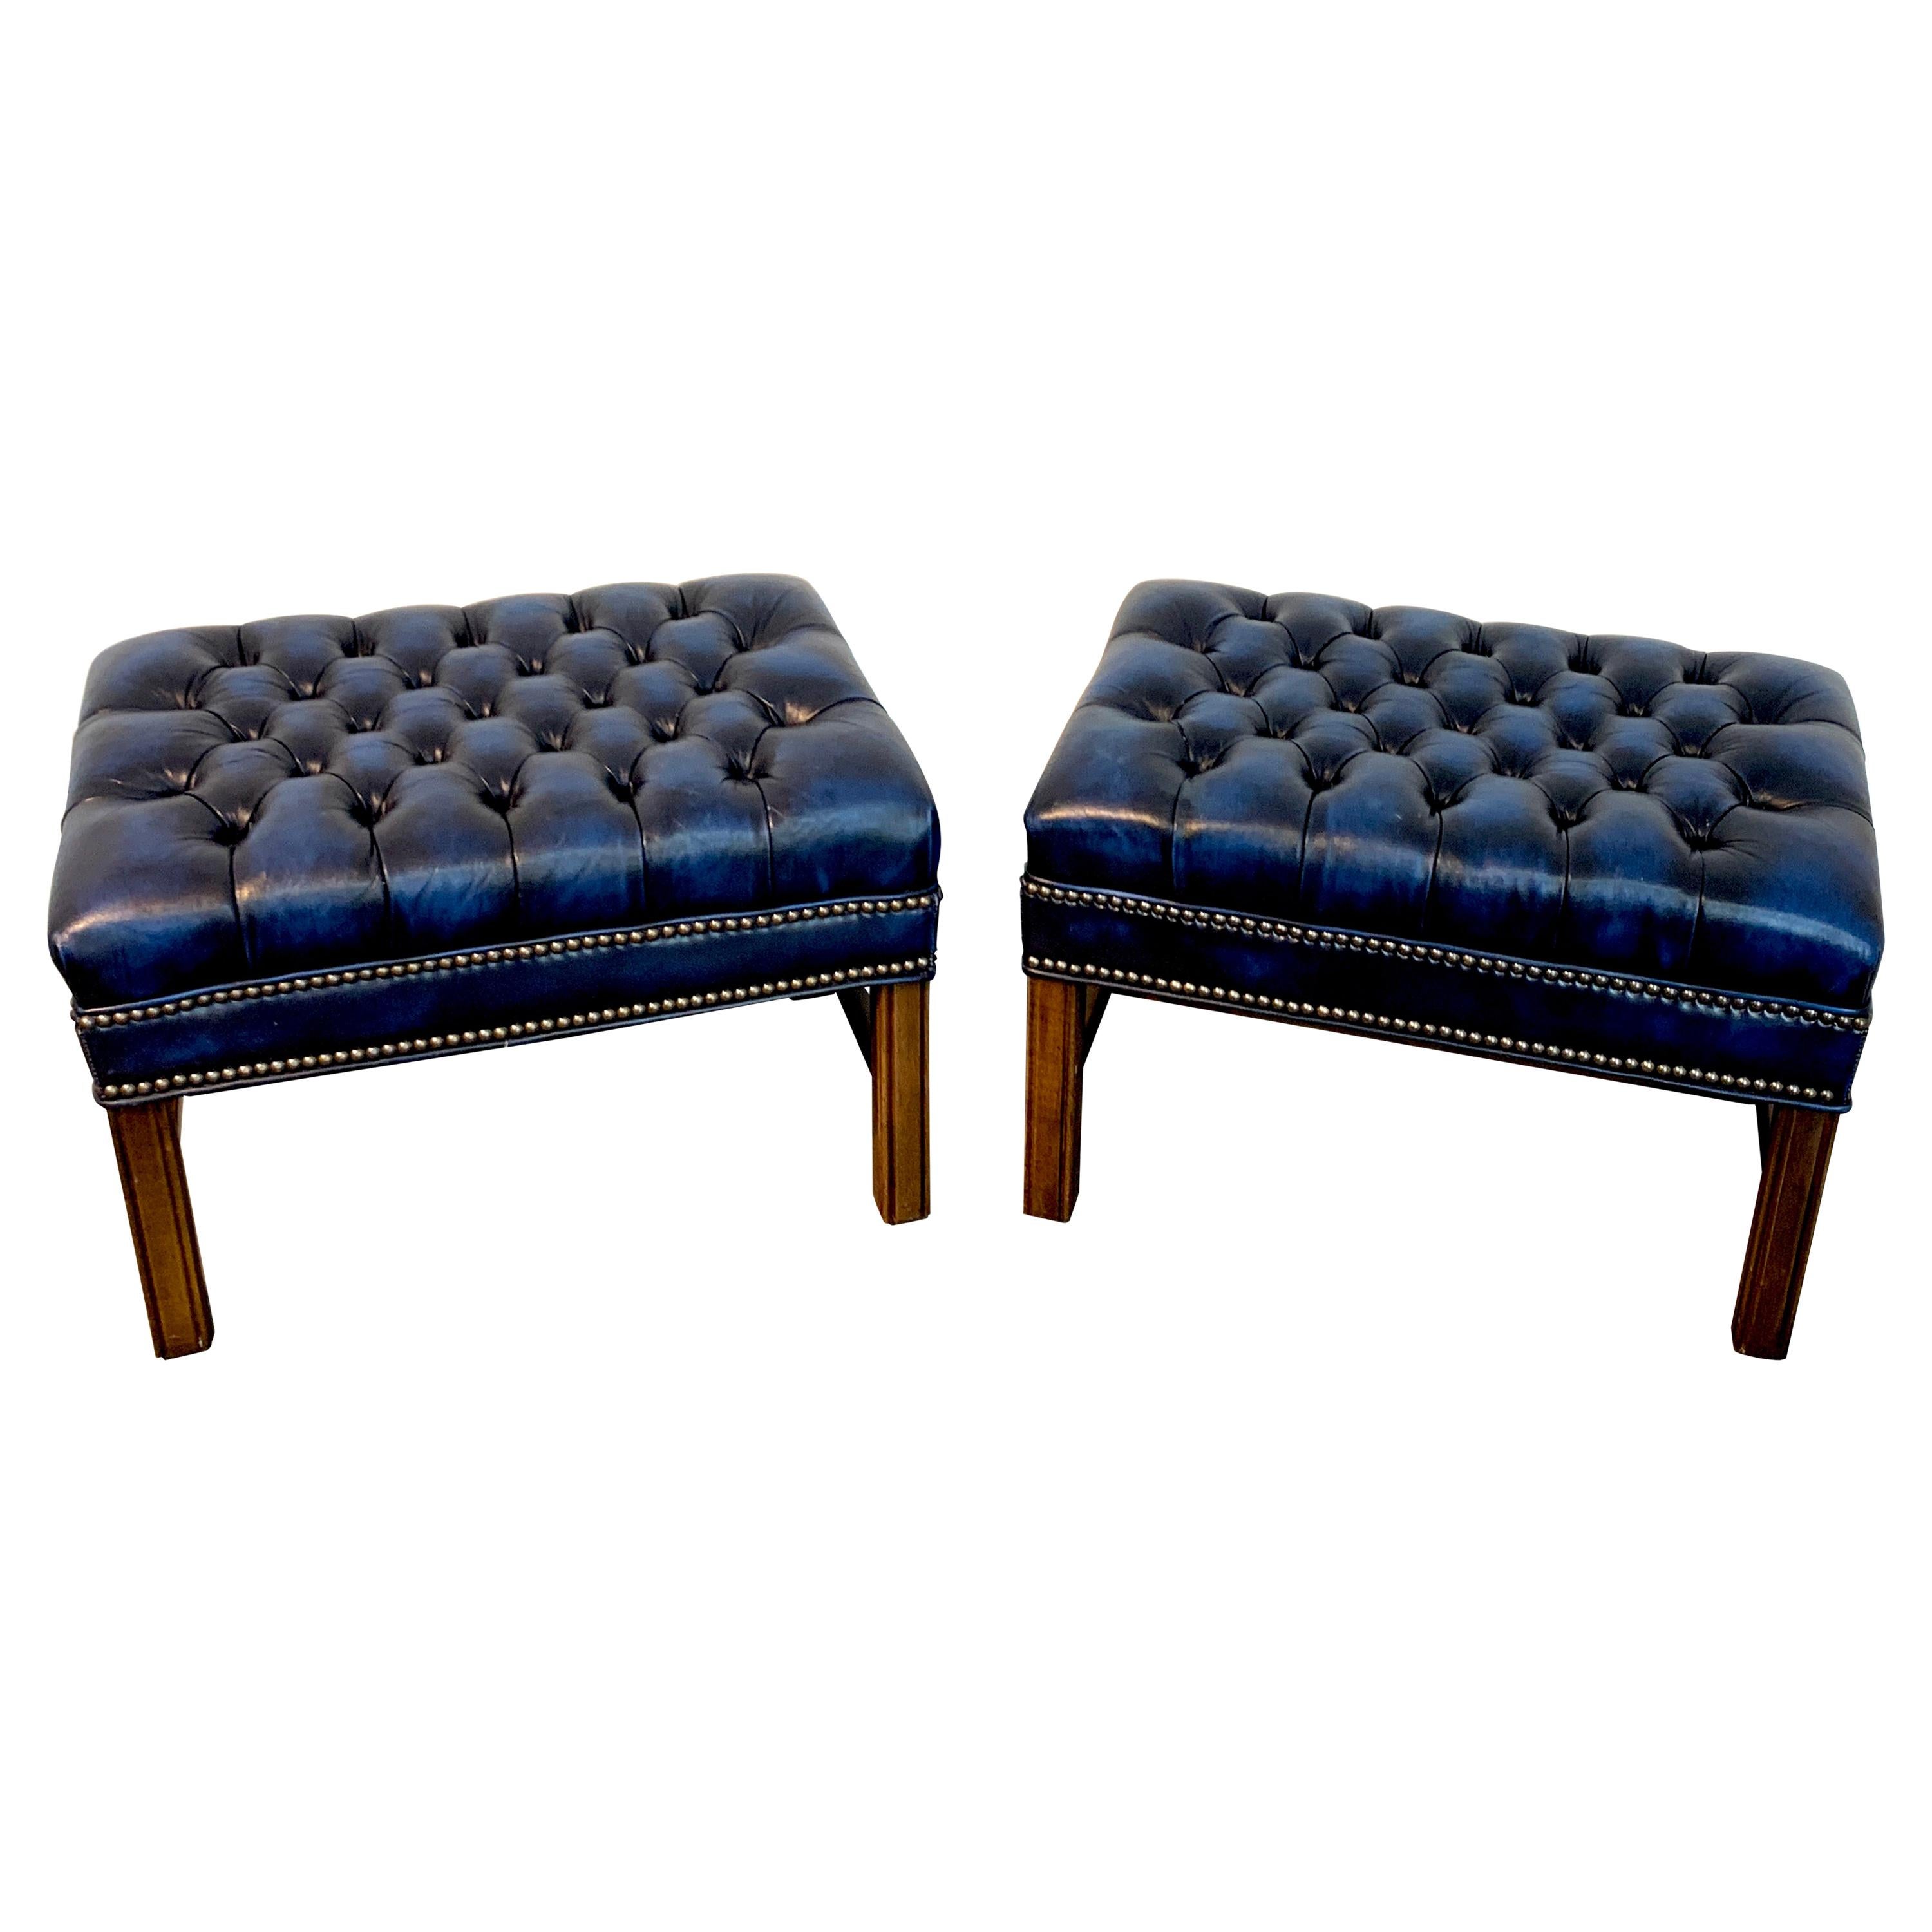 Pair of English Hollywood Regency Blue Leather Chesterfield Benches/Ottomans